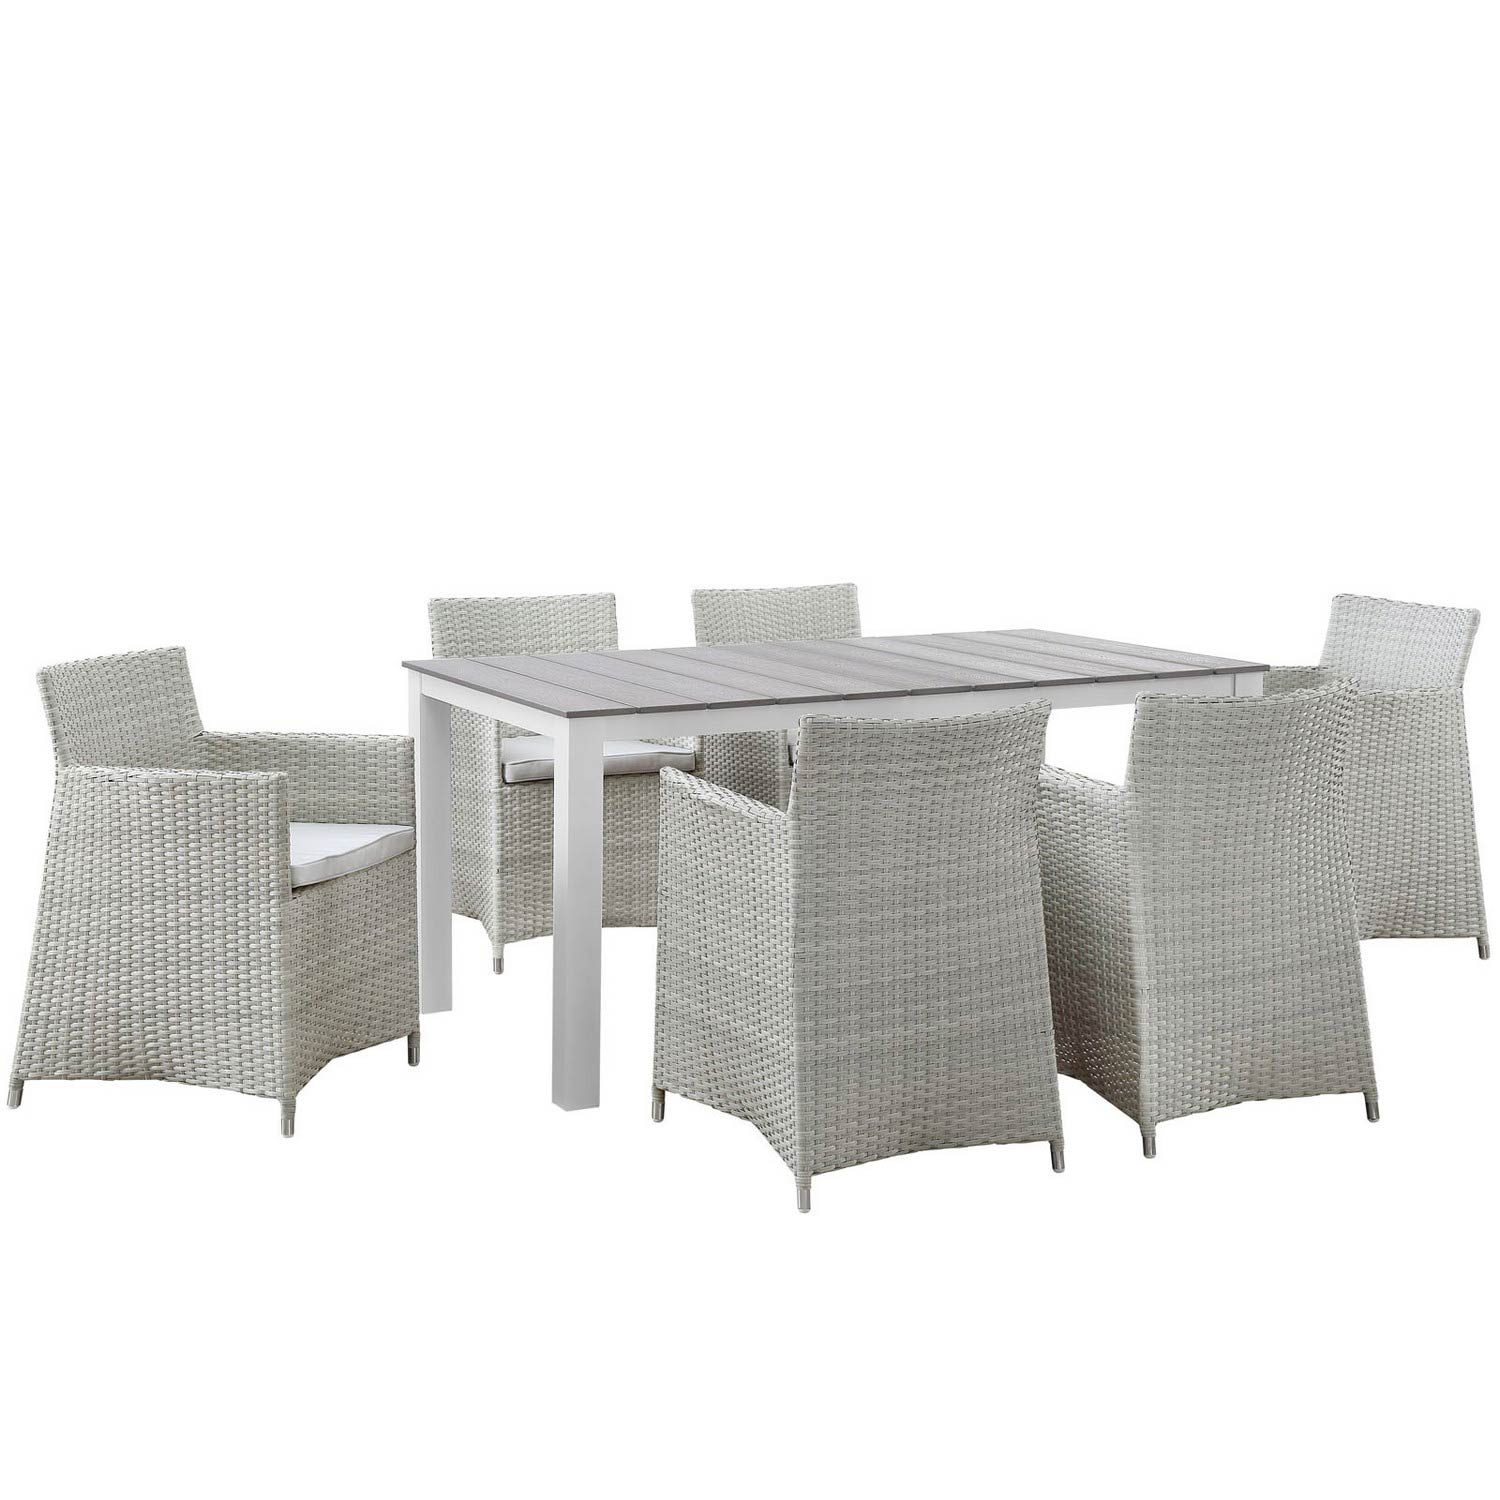 Modway Junction 7 Piece Outdoor Patio Dining Set - Gray/White